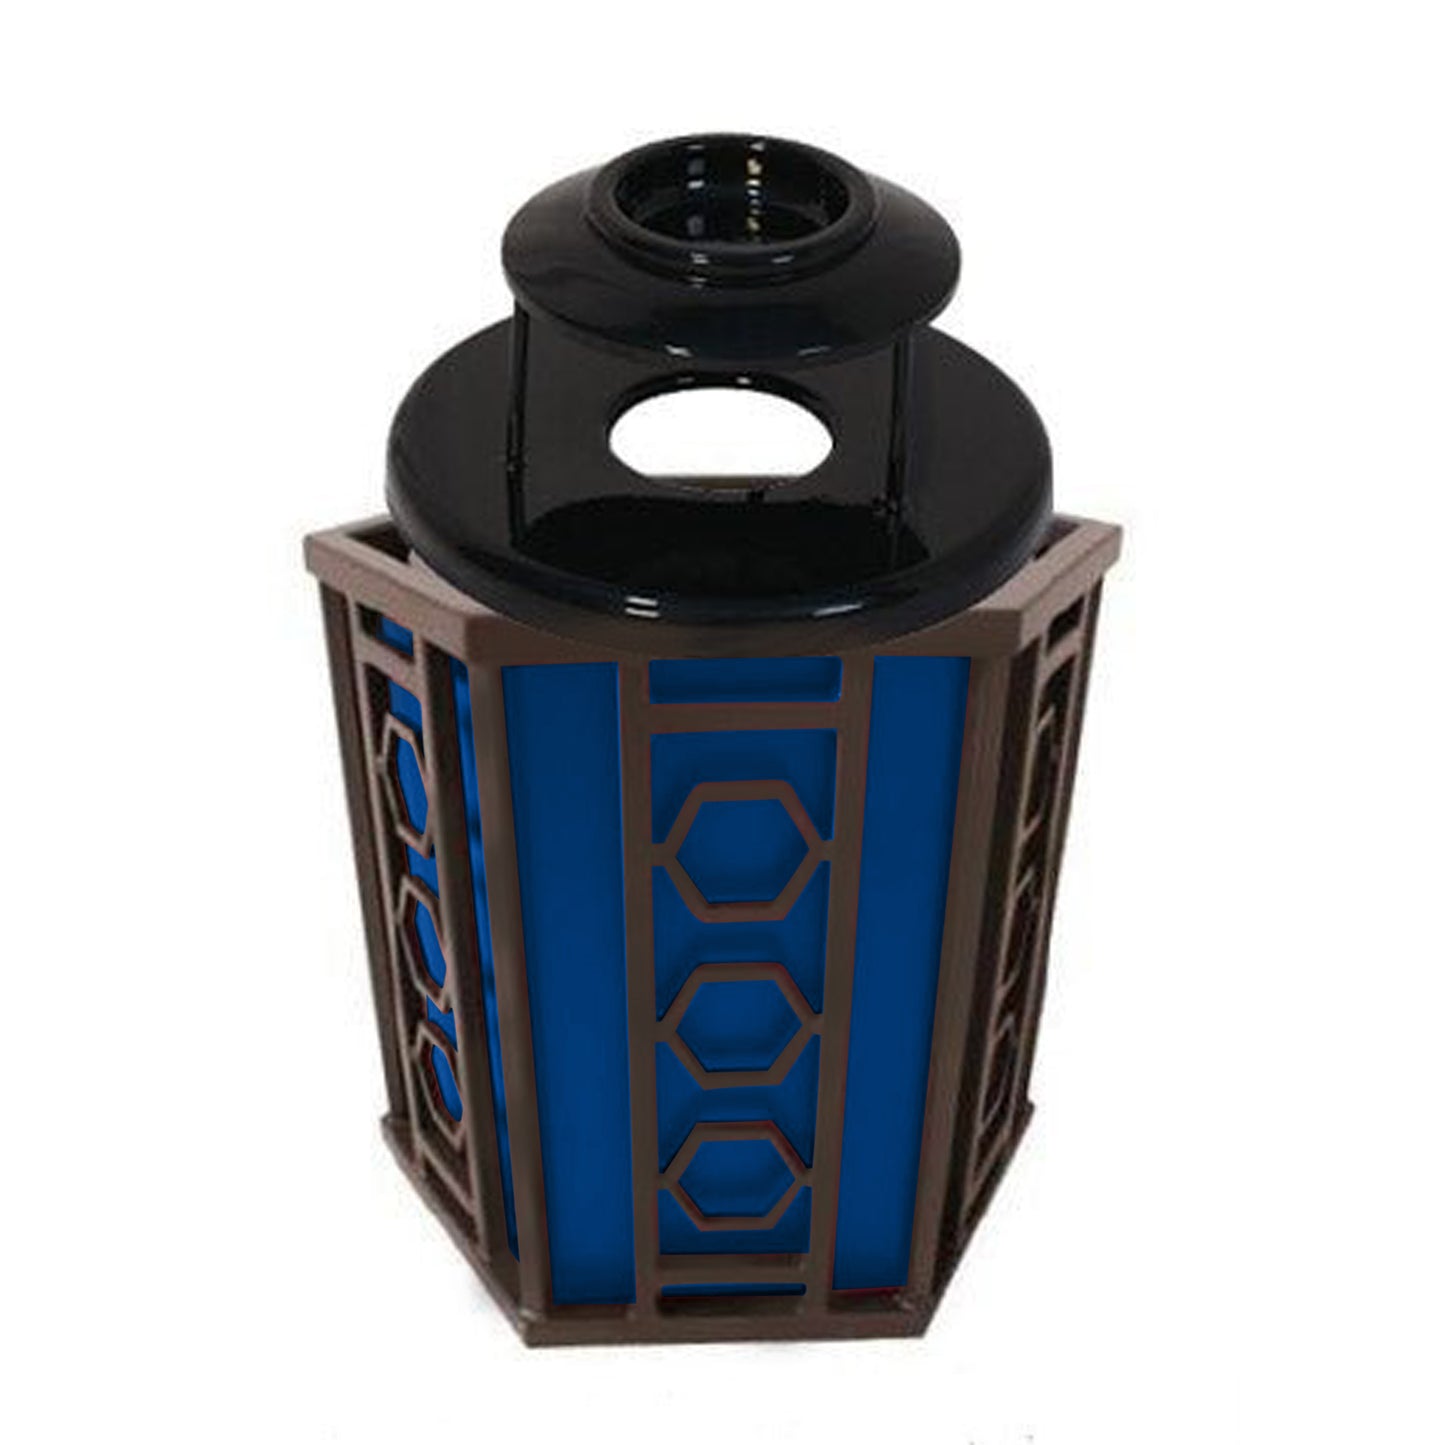 UltraPlay Huntington Trash Receptacle With Ash Urn Lid and Heavy Duty Plastic Liner - 32 Gallon